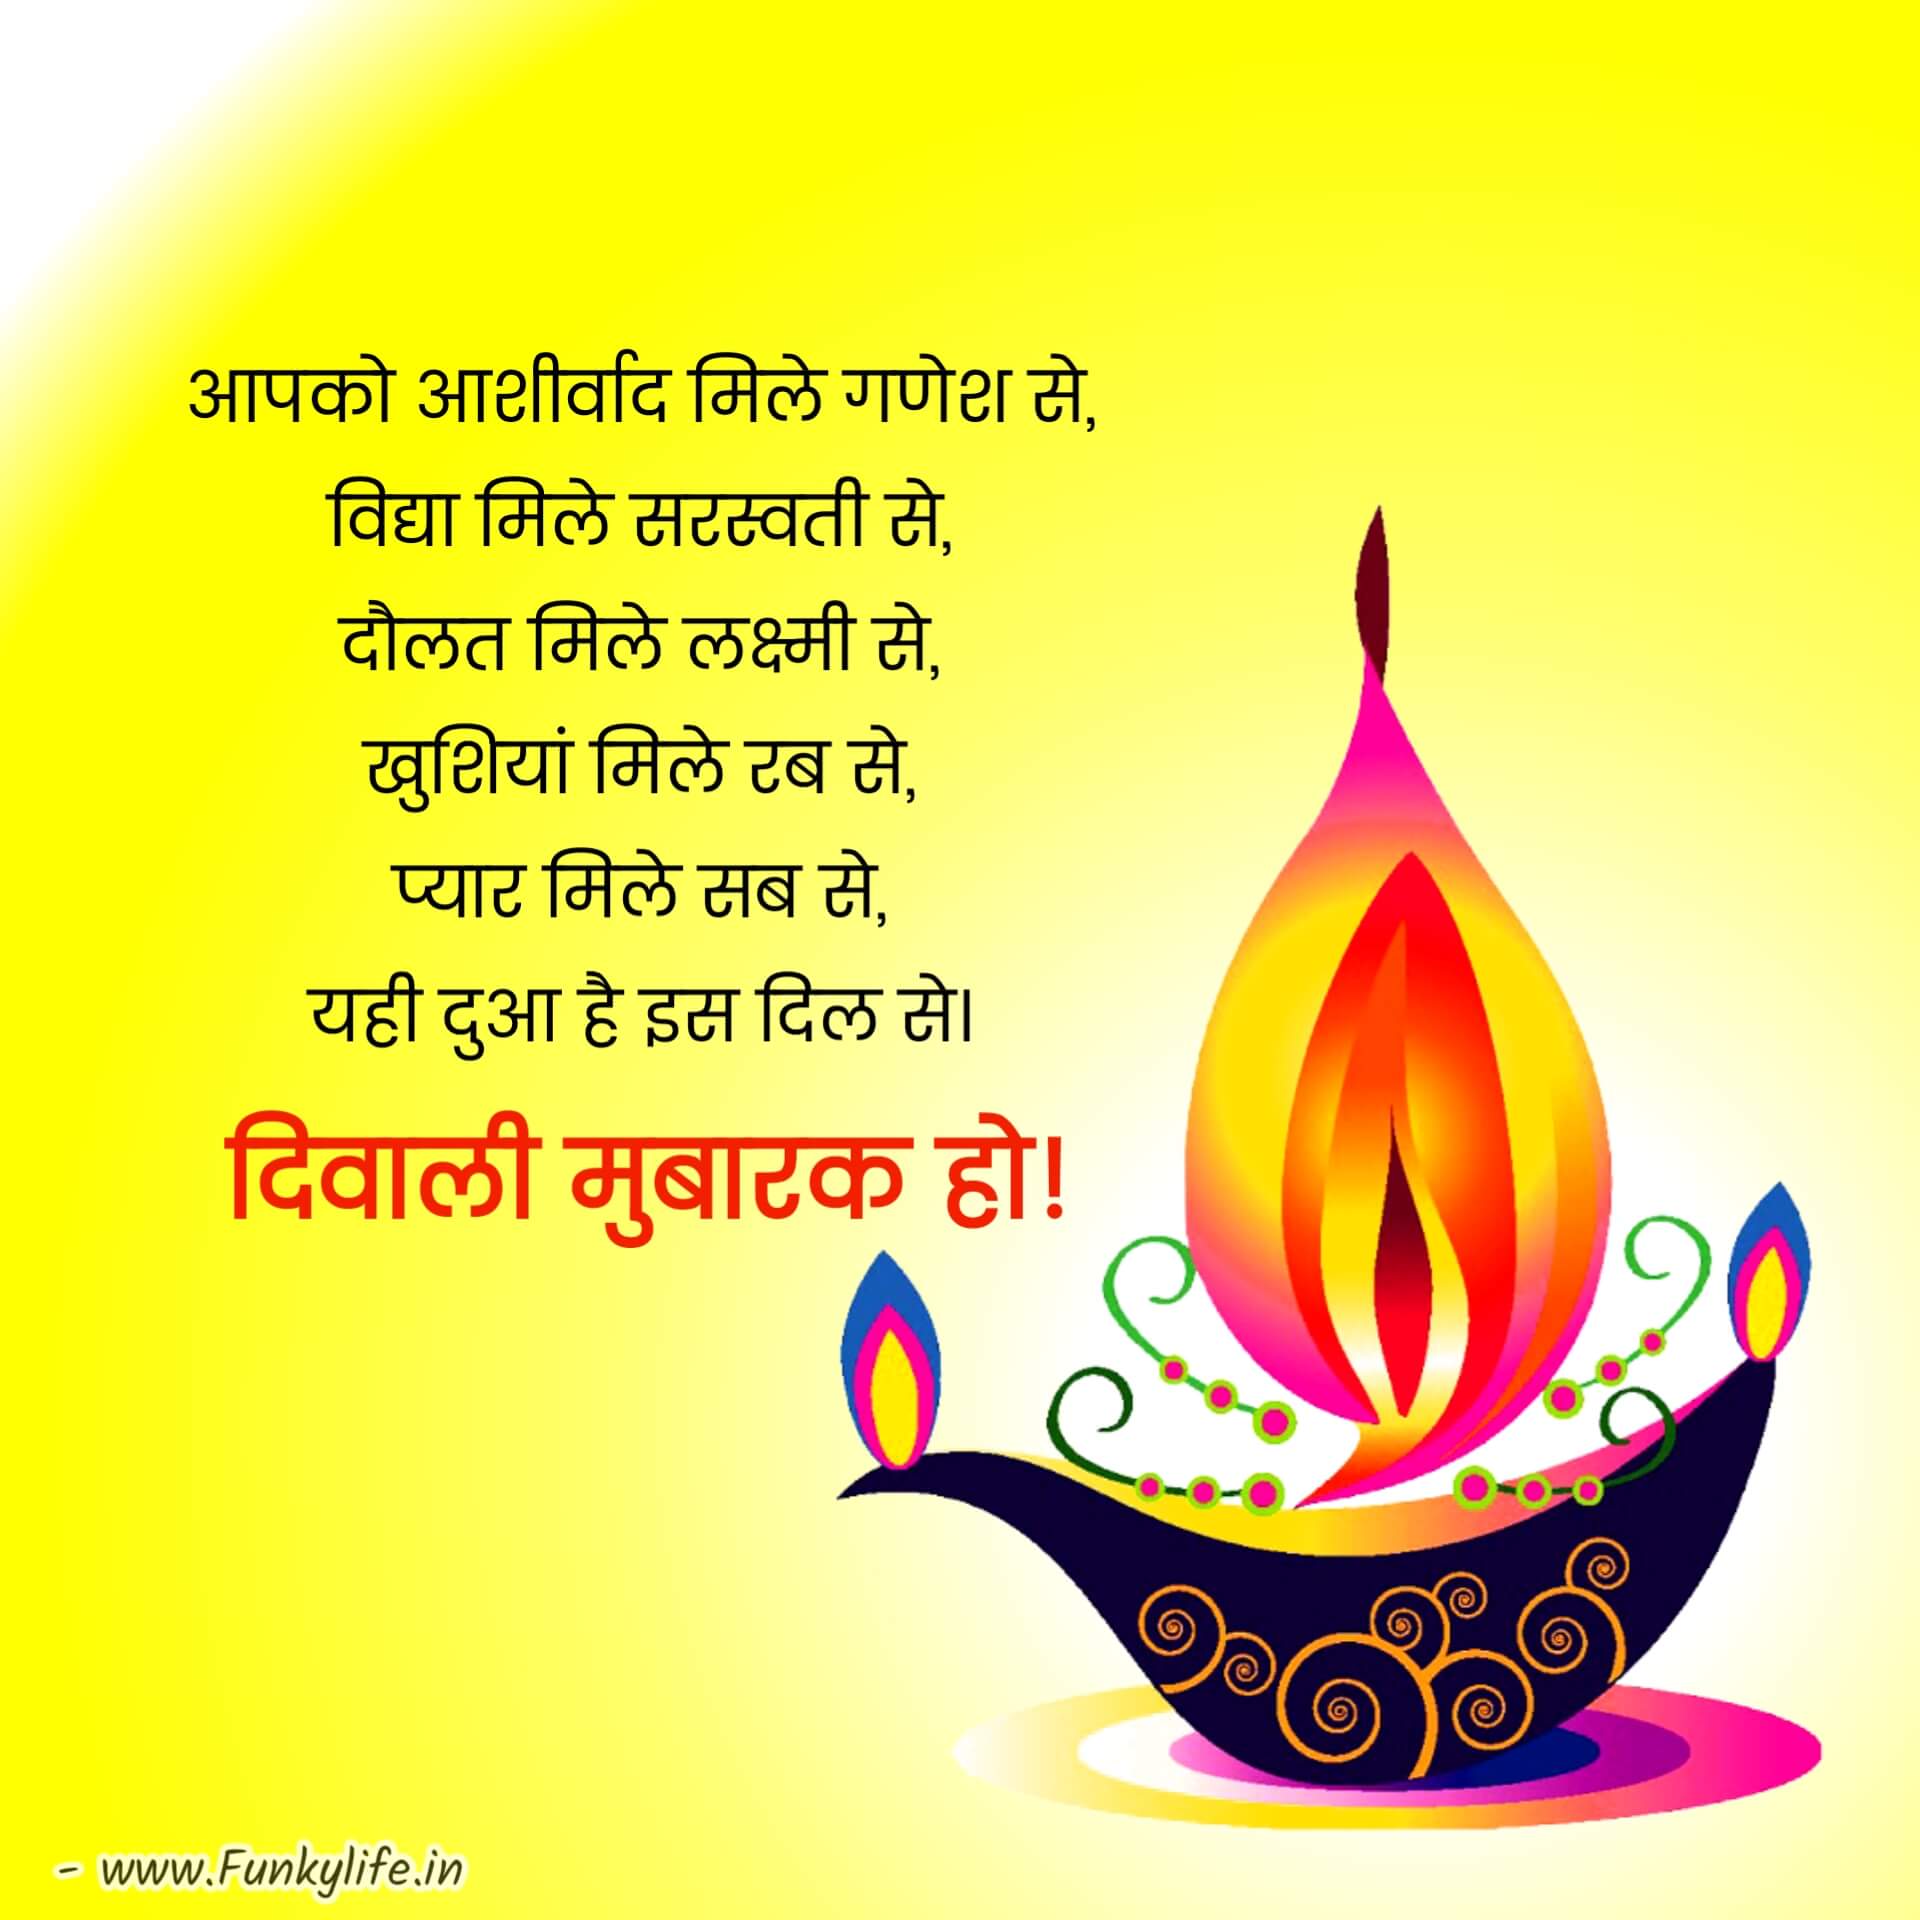 Best Wishes for Diwali in Hindi